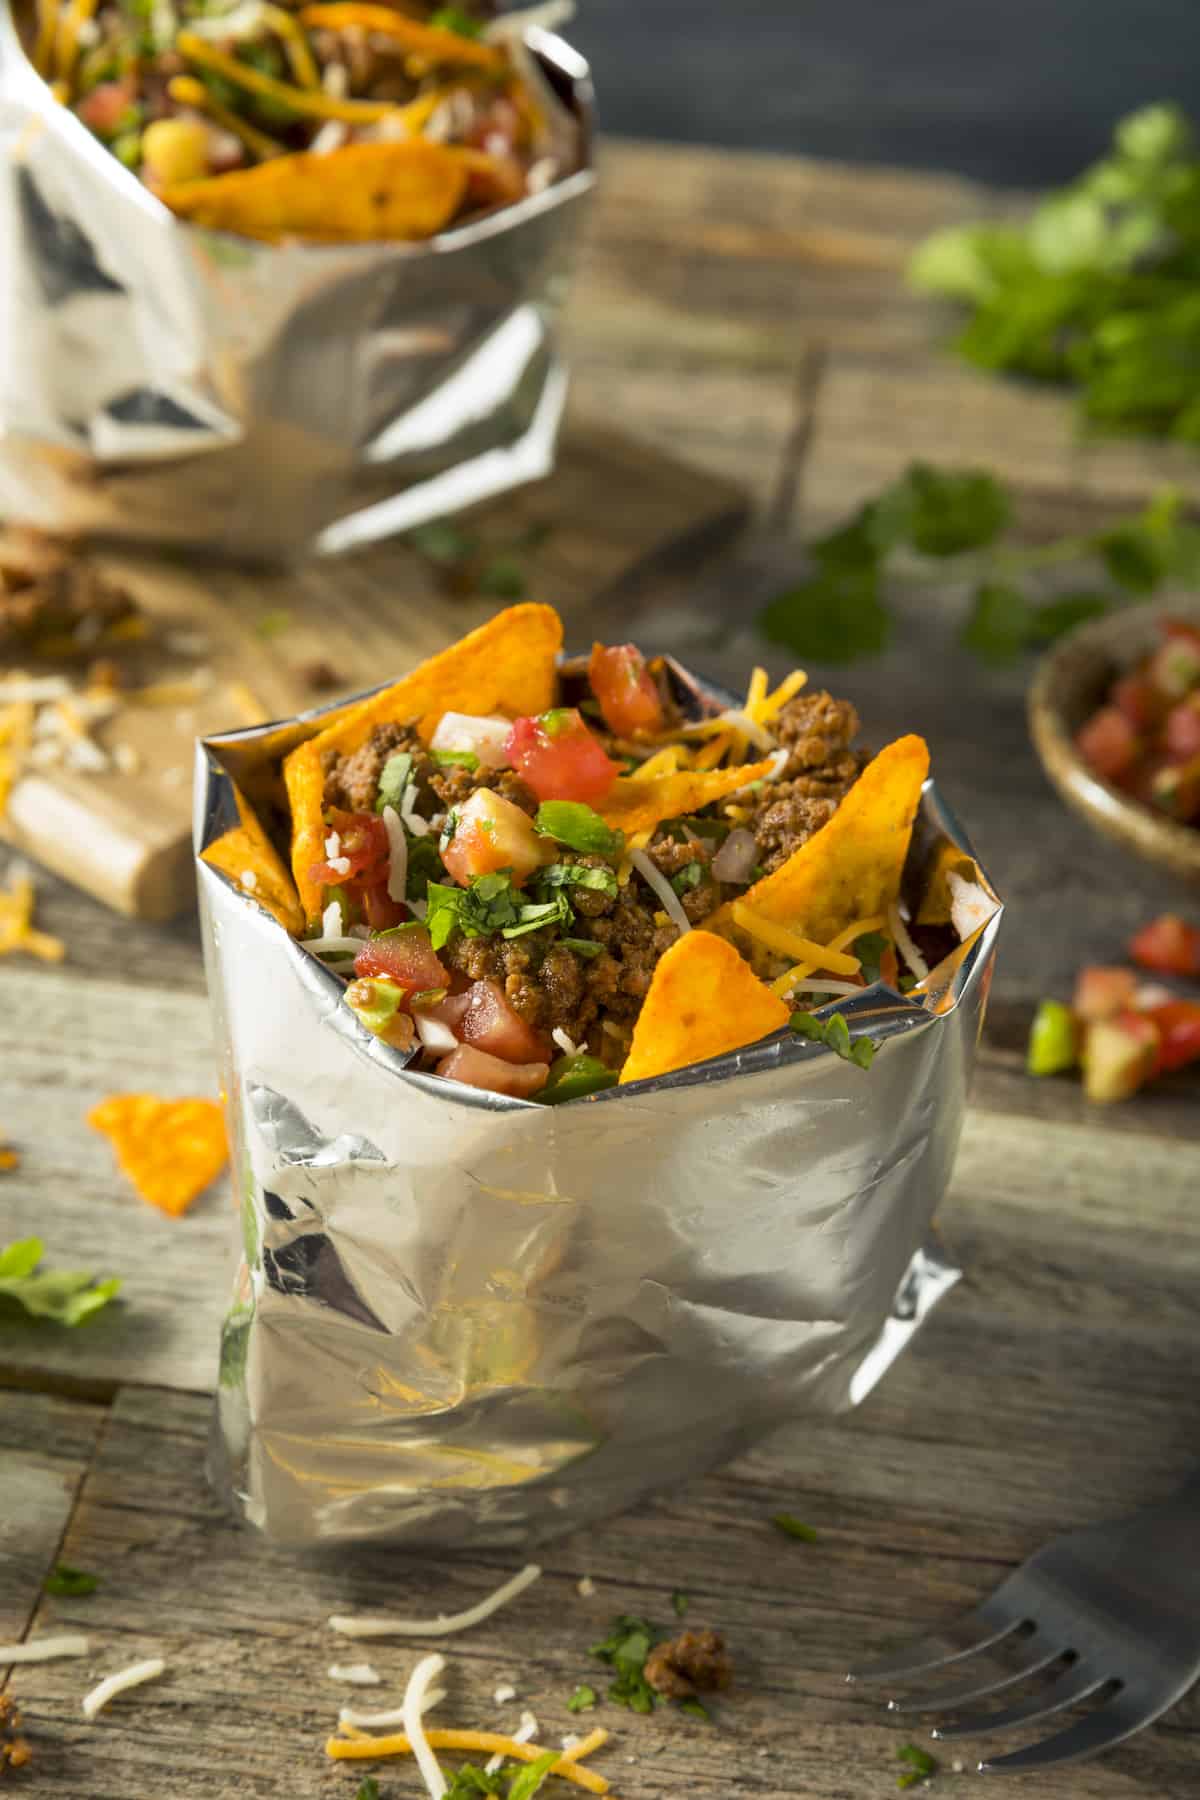 A bag with chips, taco meat, fixings and a fork